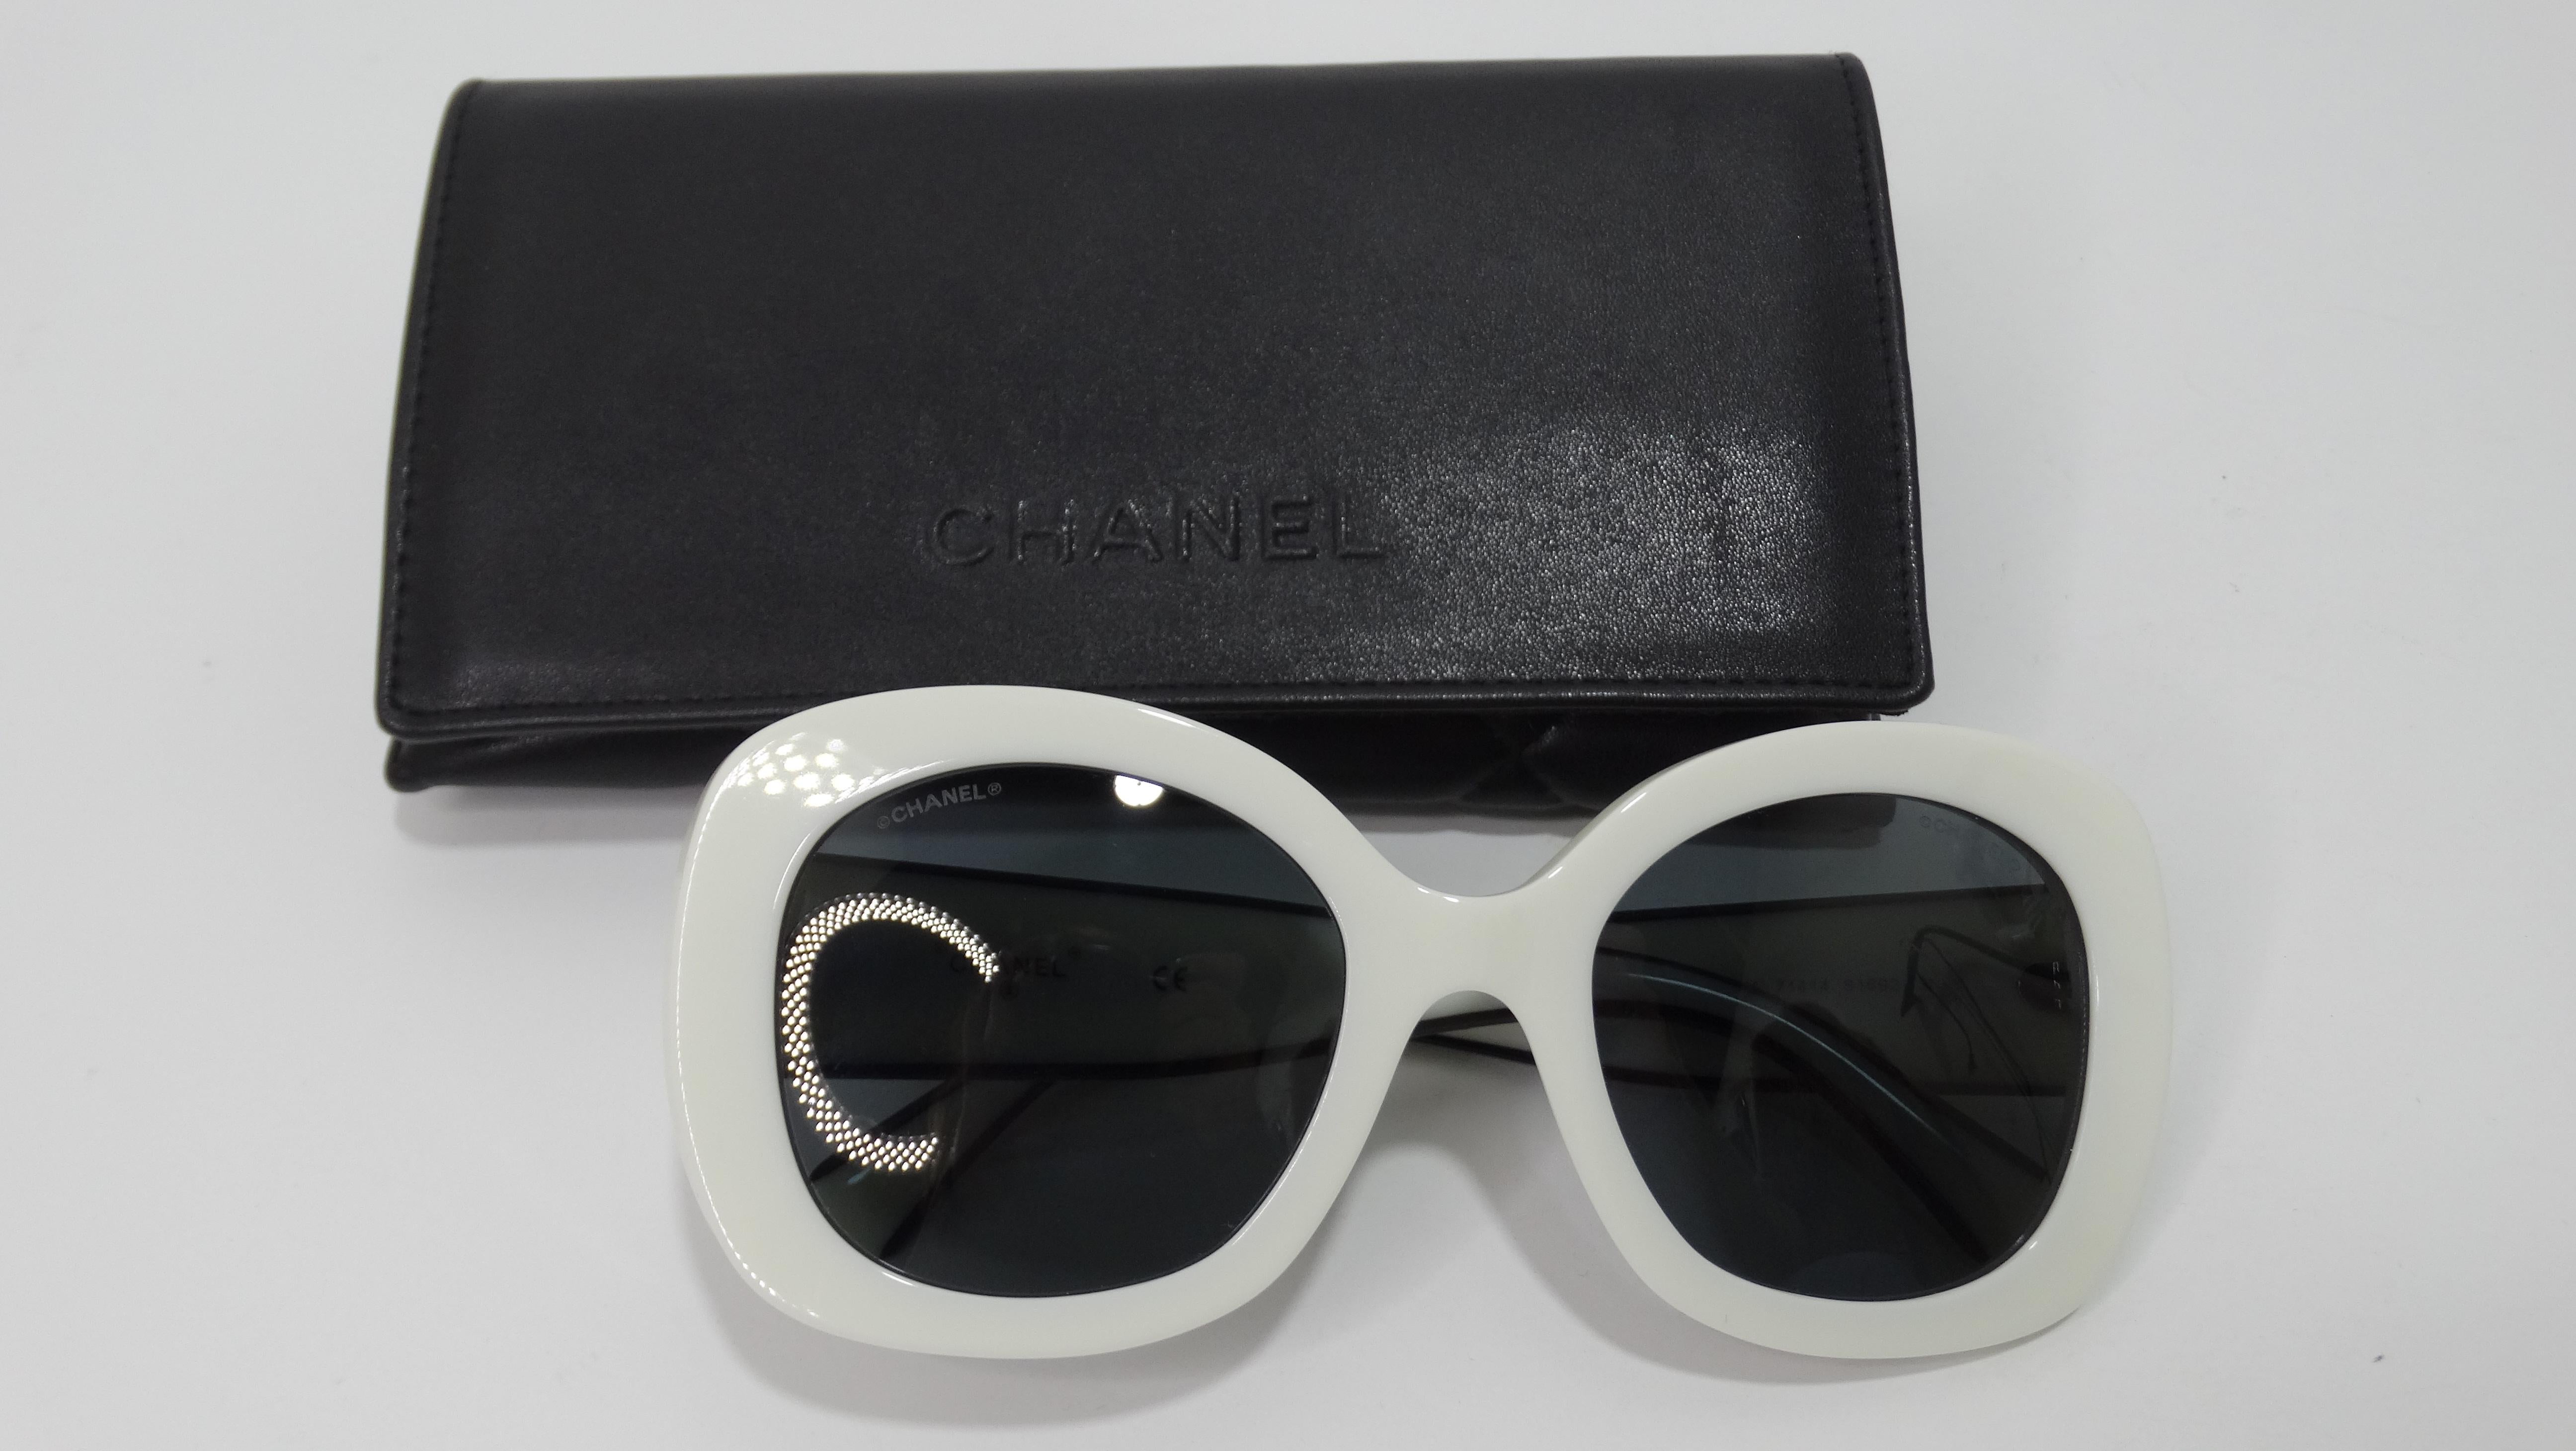 These are an iconic two-tone Chanel sunglasses that needs to be yours! A classic silhouette with a square frame and rounded edges paired with a modern black and white design. It features a black 'CHANEL' on each arm. These have a retro look with a